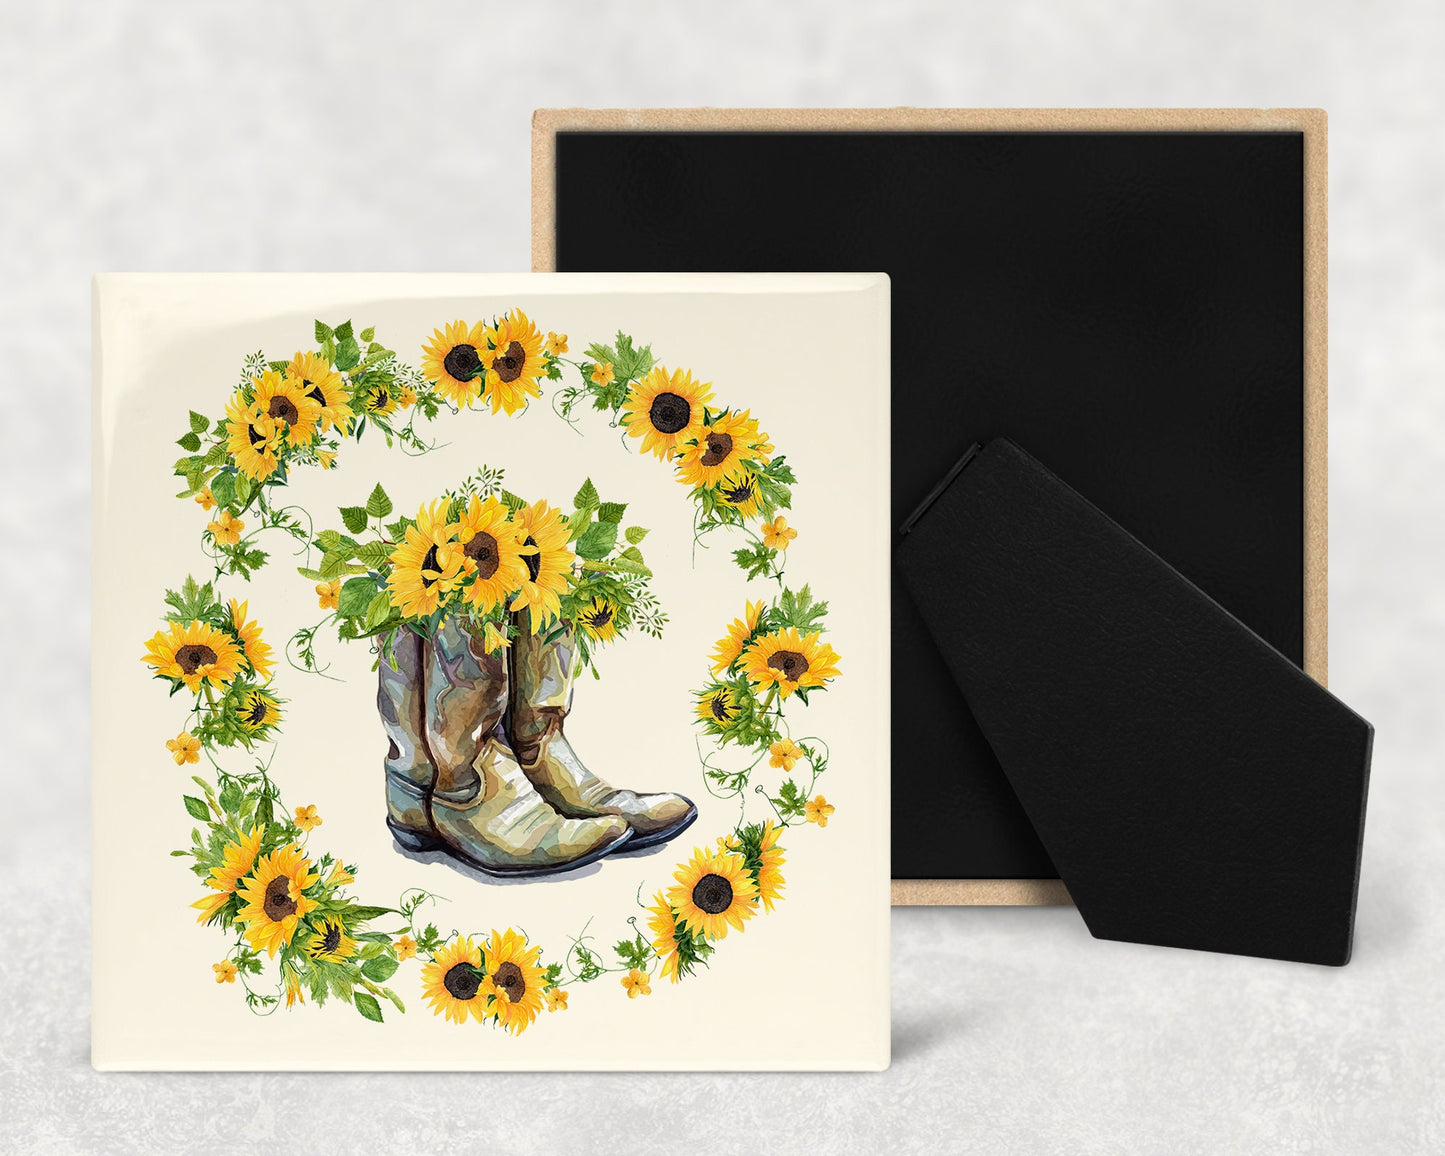 Sunflowers and Cowgirl Boots Art Decorative Ceramic Tile with Optional Easel Back - Available in 3 Sizes